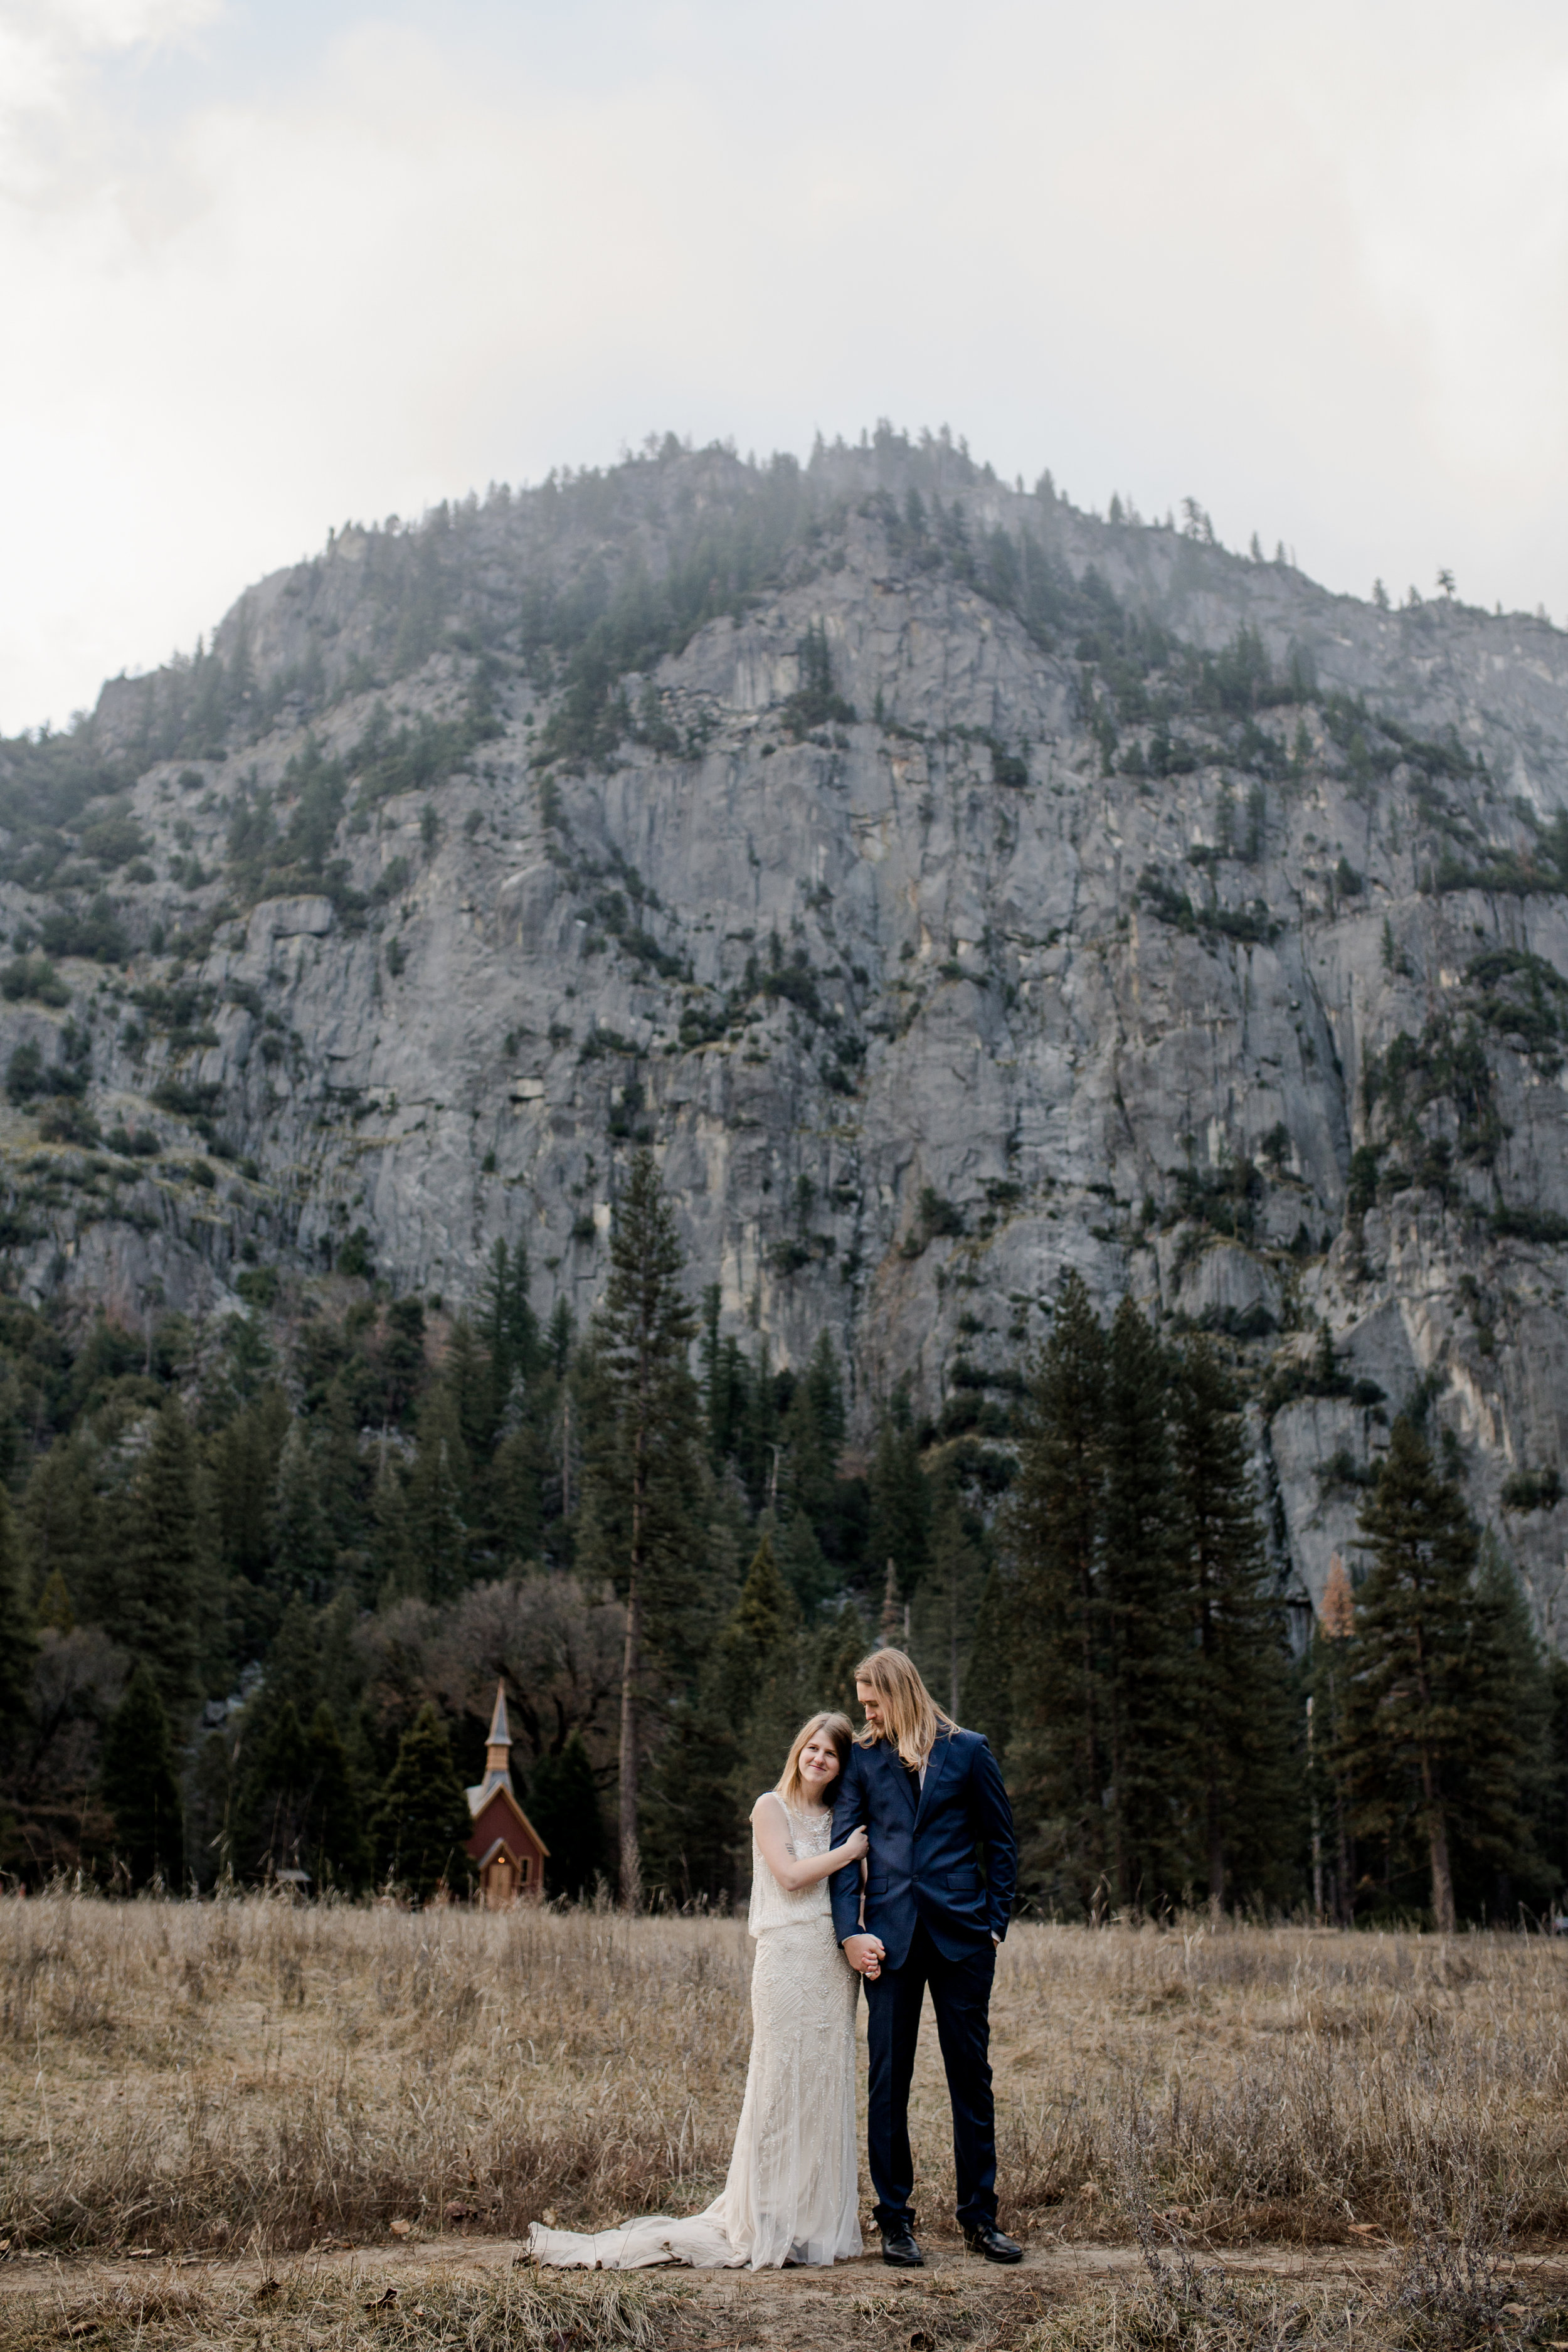 nicole-daacke-photography-yousemite-national-park-elopement-photographer-winter-cloud-moody-elope-inspiration-yosemite-valley-tunnel-view-winter-cloud-fog-weather-wedding-photos-63.jpg